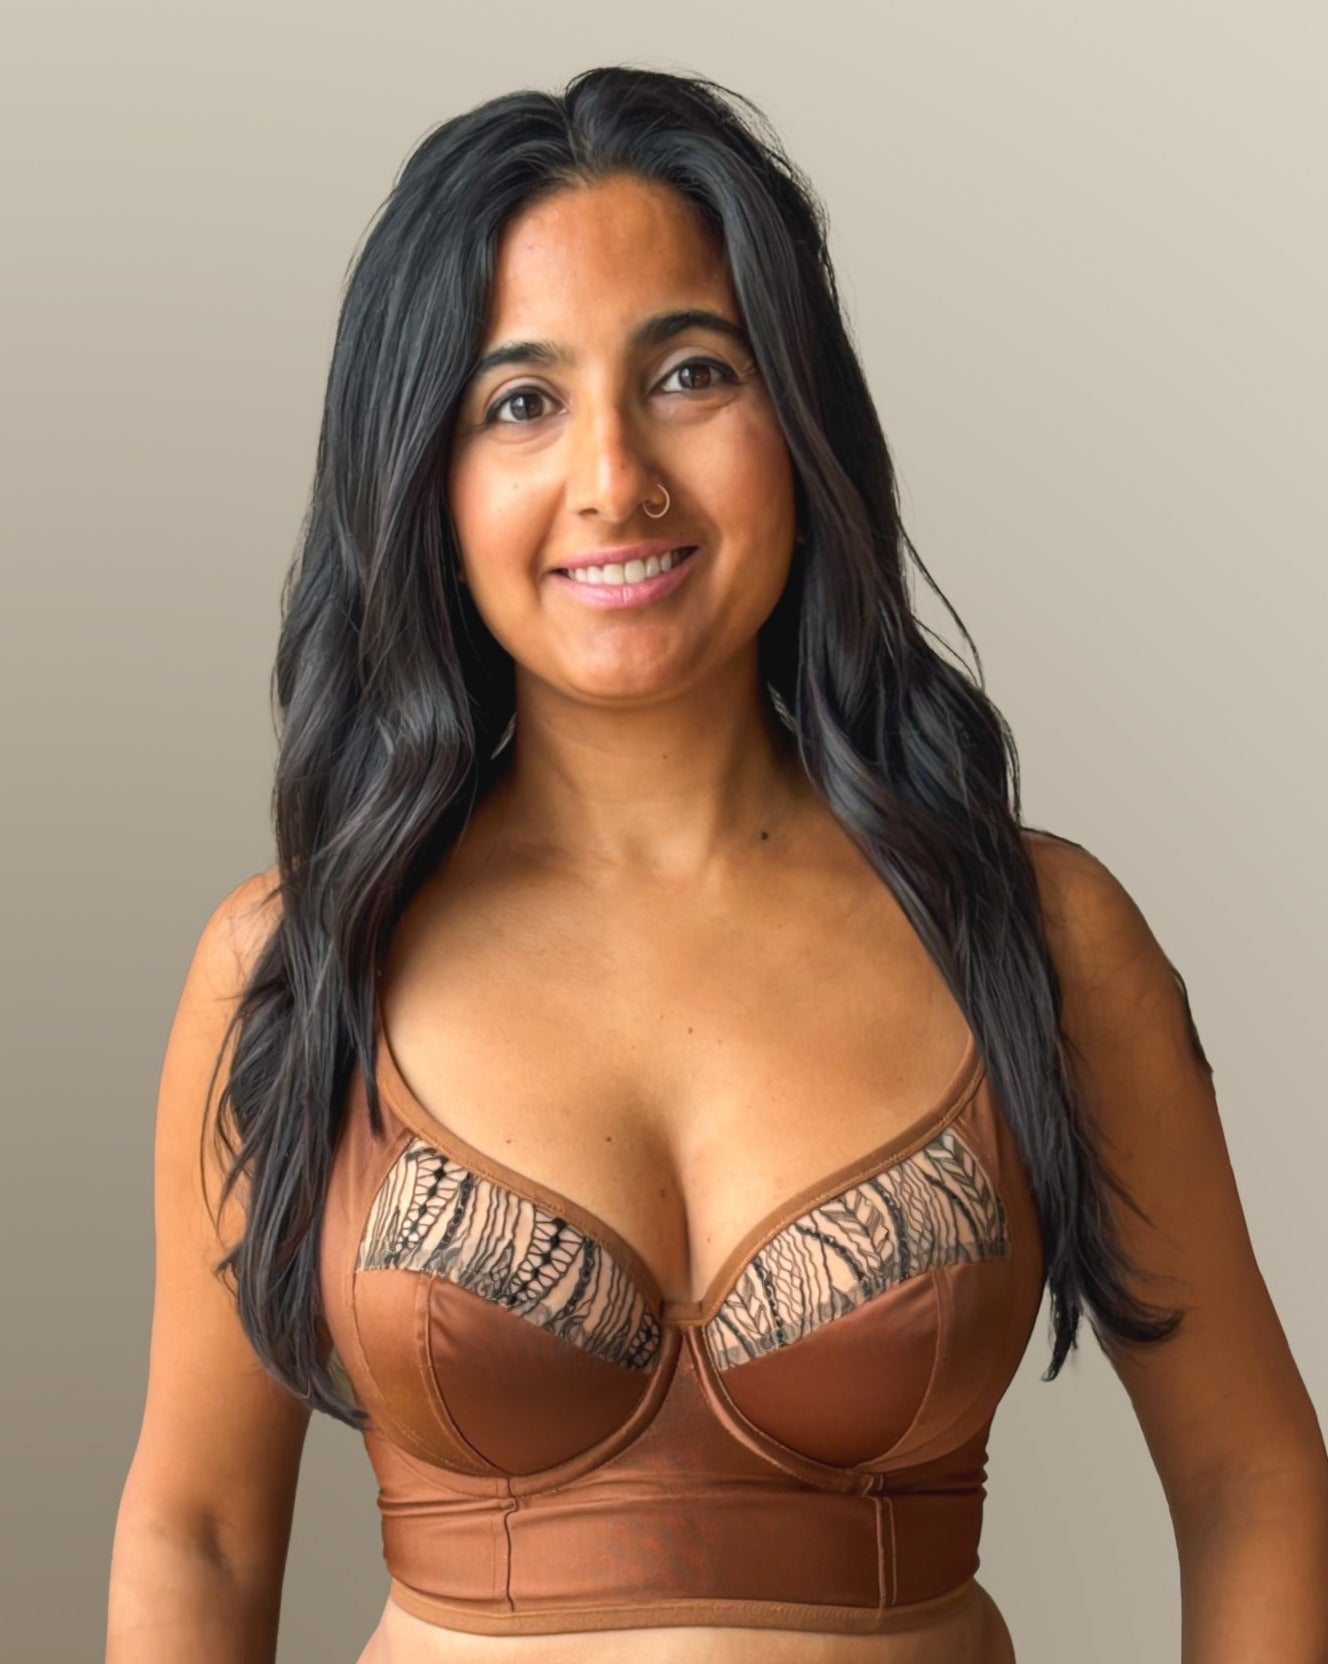 The Bette Bustier By Rubies Custom Bras. Get a custom bra that's wired, push up, sexy and has cleavage. Show off your bra with a bra top that can we worn out. Our custom bustier can be customized to your special needs. Perfect for special occasions or those wanting to treat themselves with a special premium luxury bra that's ethically made in Toronto Canada and the USA.